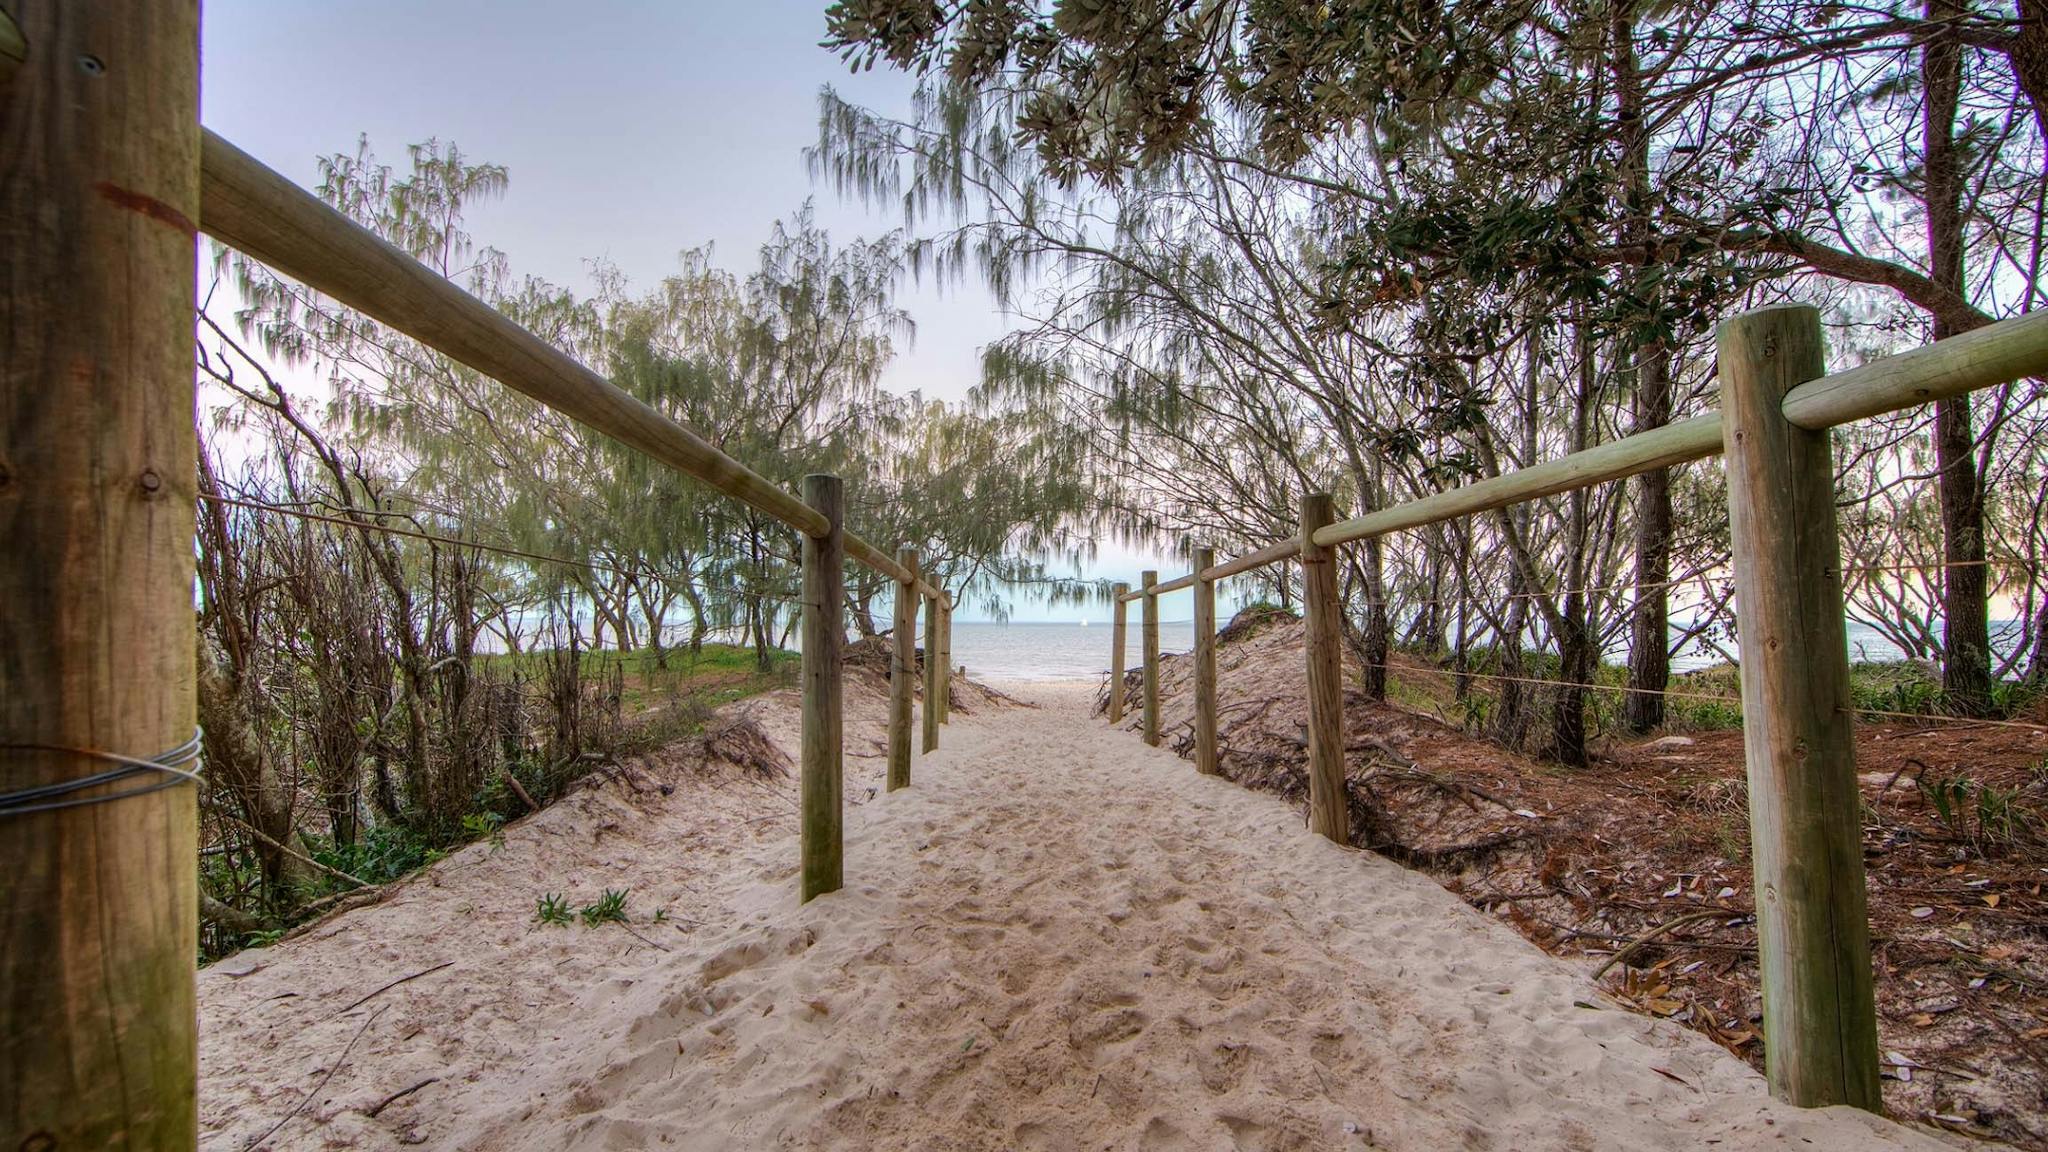 Entry walkway to beach at dusk